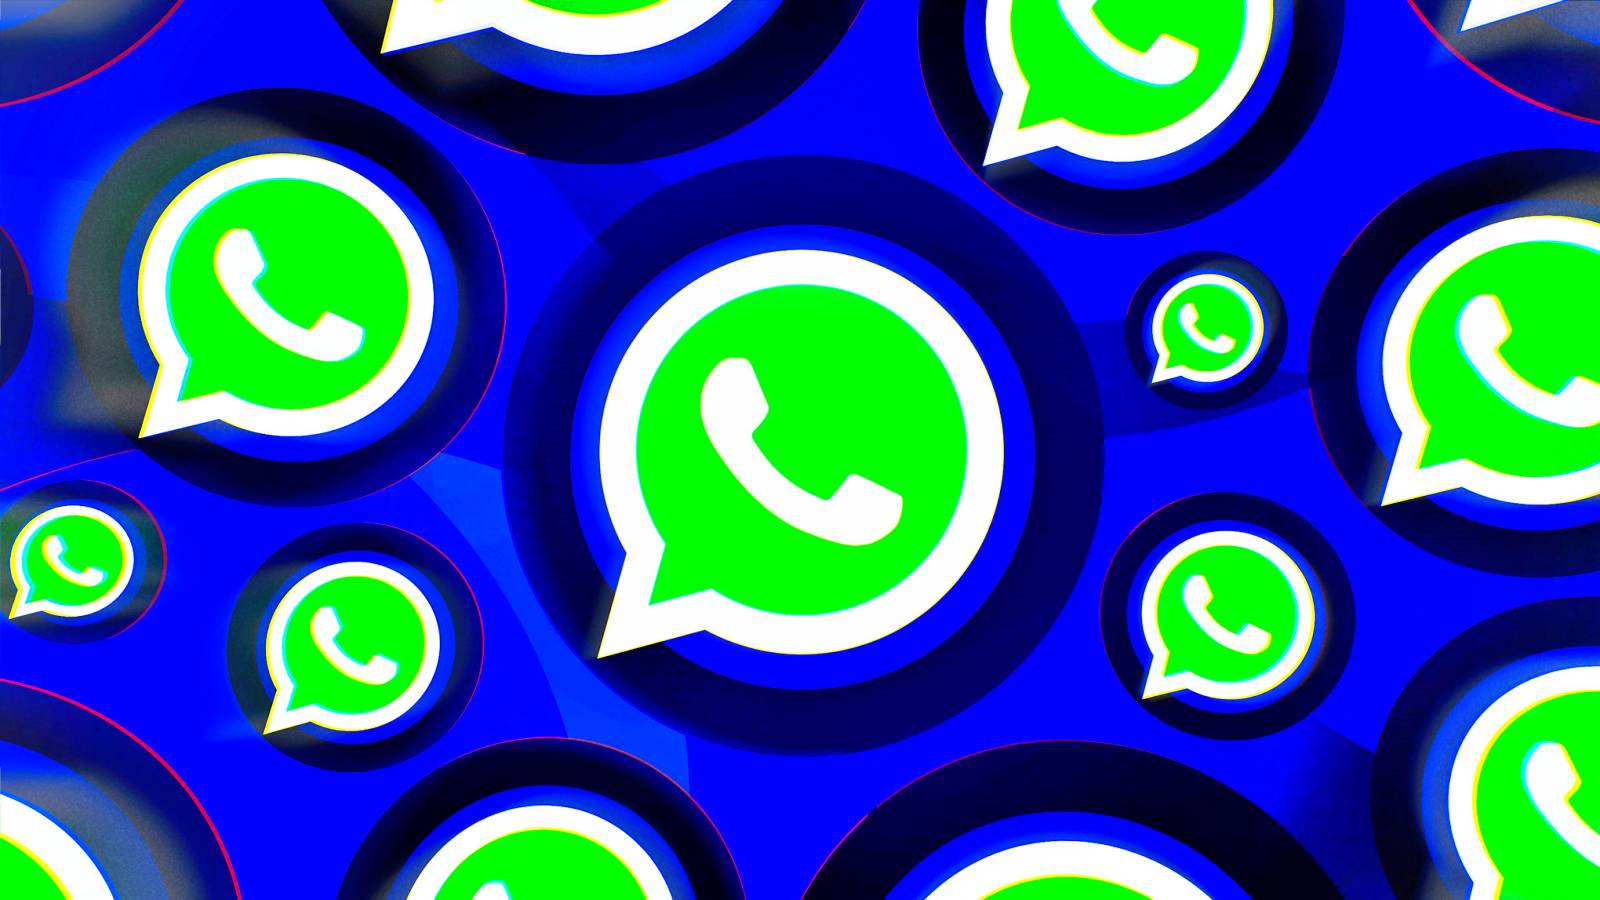 WhatsApp Changing SECRET iPhone Android Users